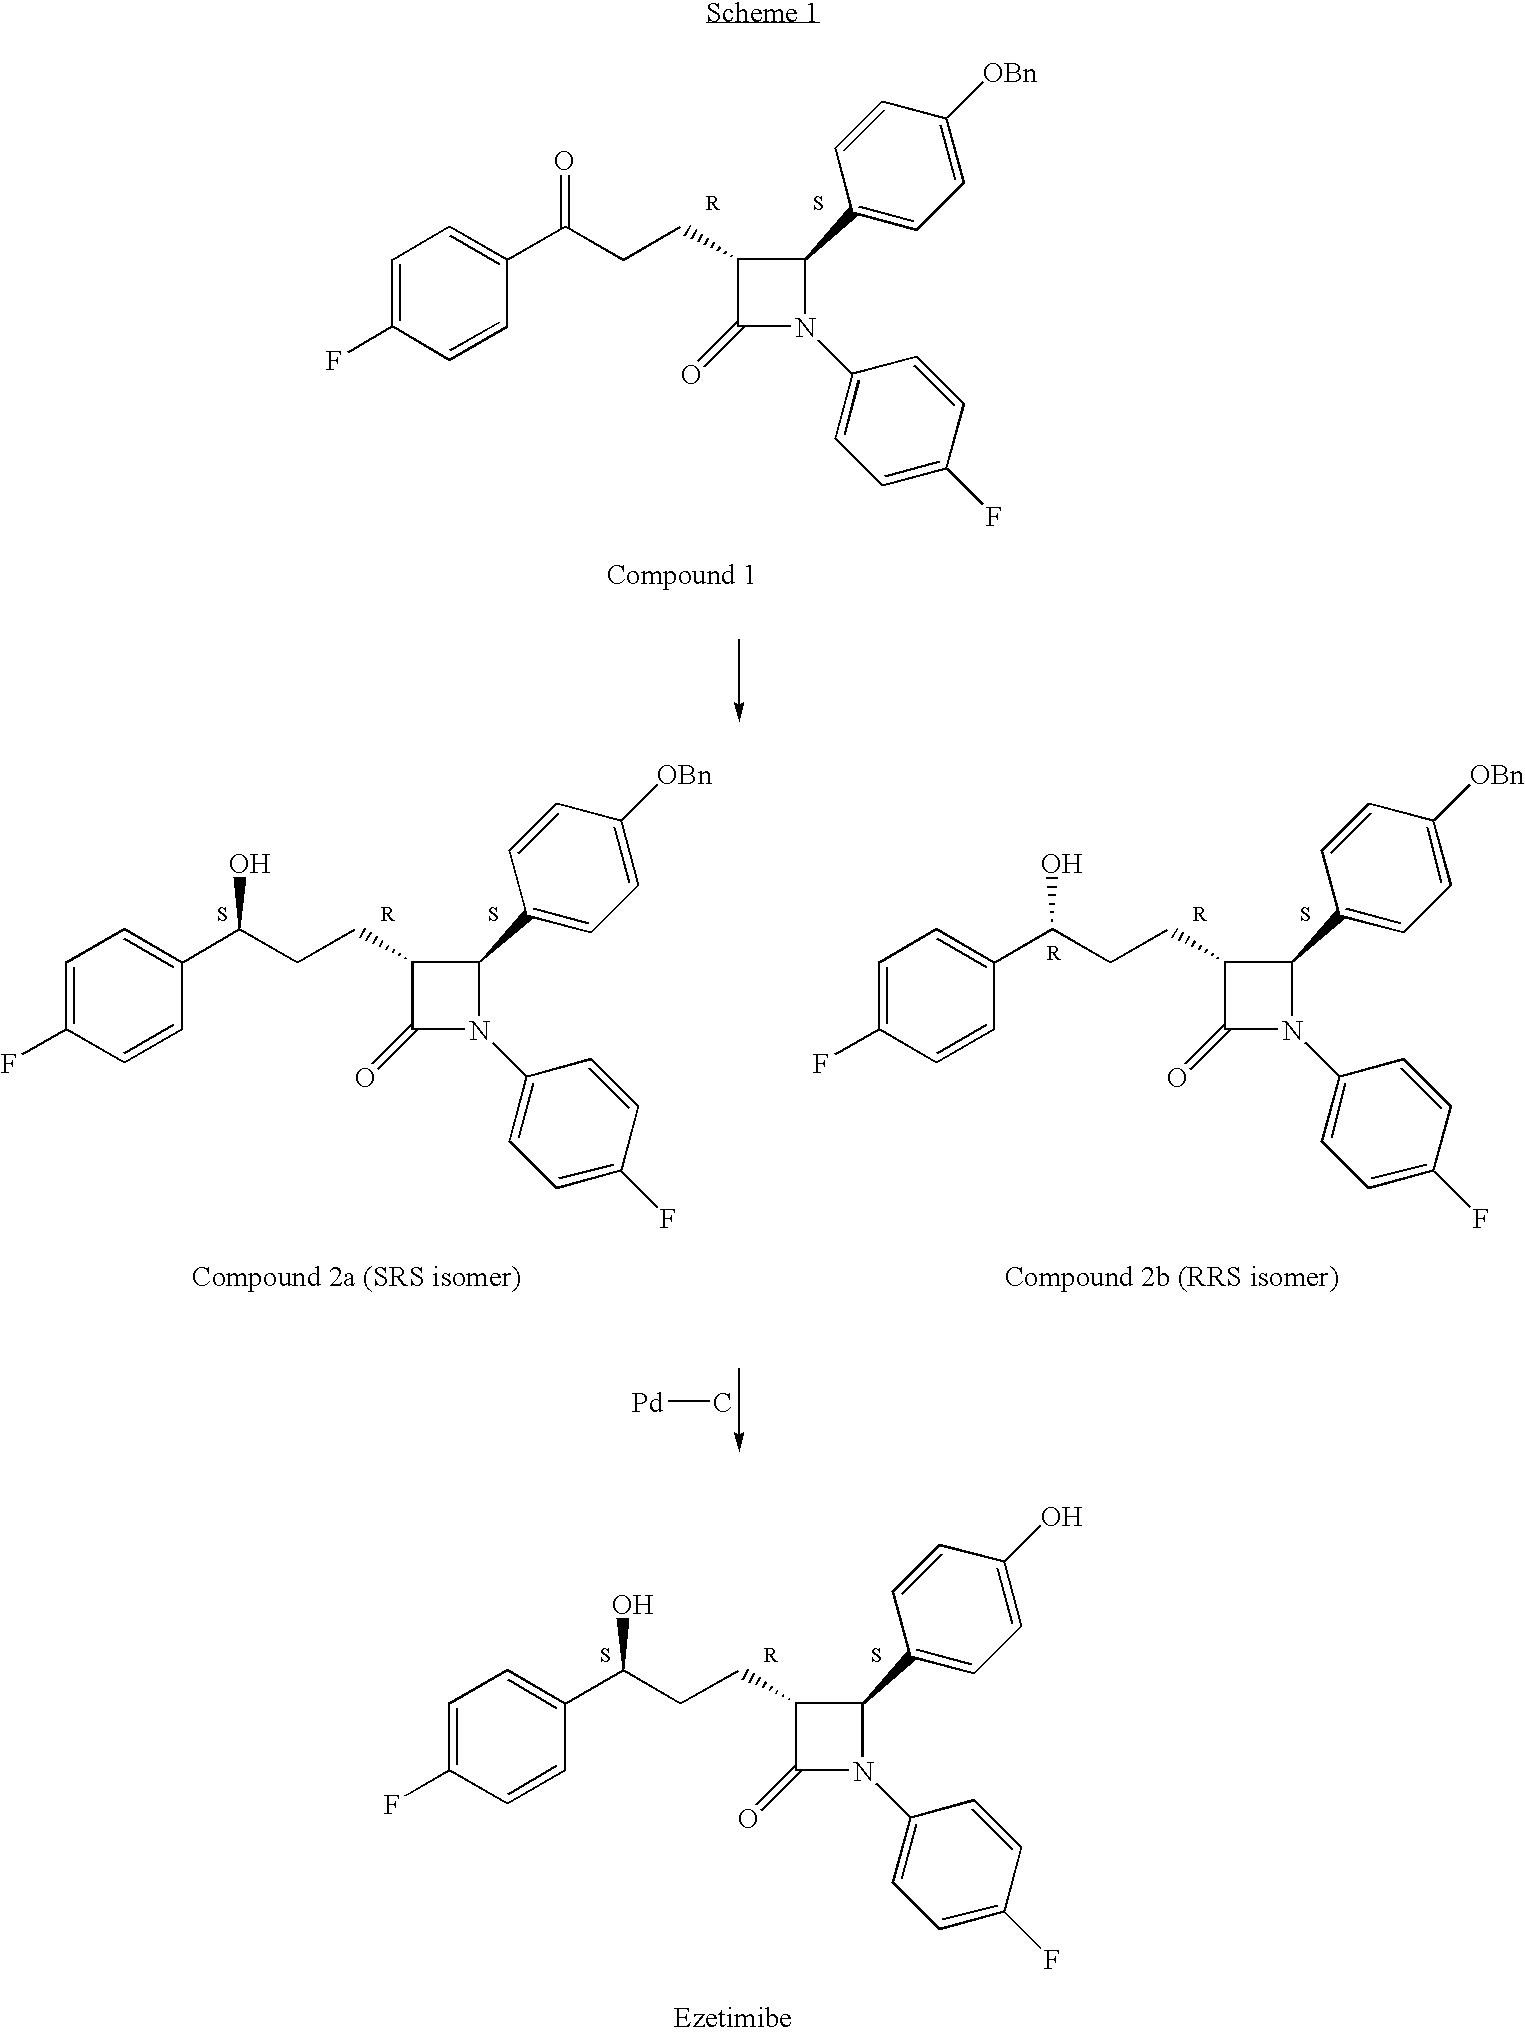 Reduction processes for the preparation of ezetimibe